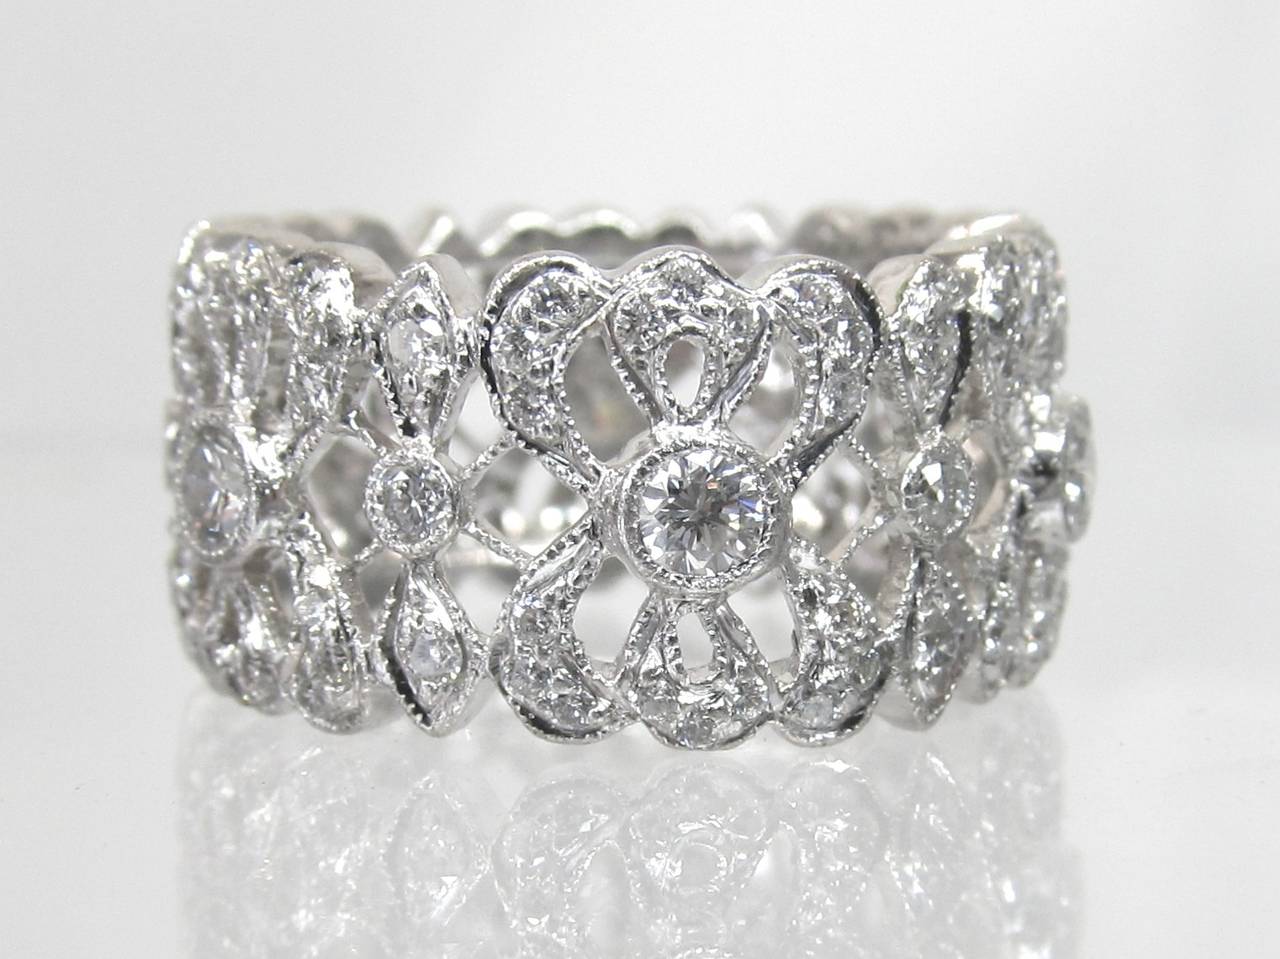 Elegant art deco designed diamond band with detailed workmanship!
Brilliant diamonds approximately 1.40 carats  set in a platinum setting.
Ring size is 6.5 
Width of the band is 11mm